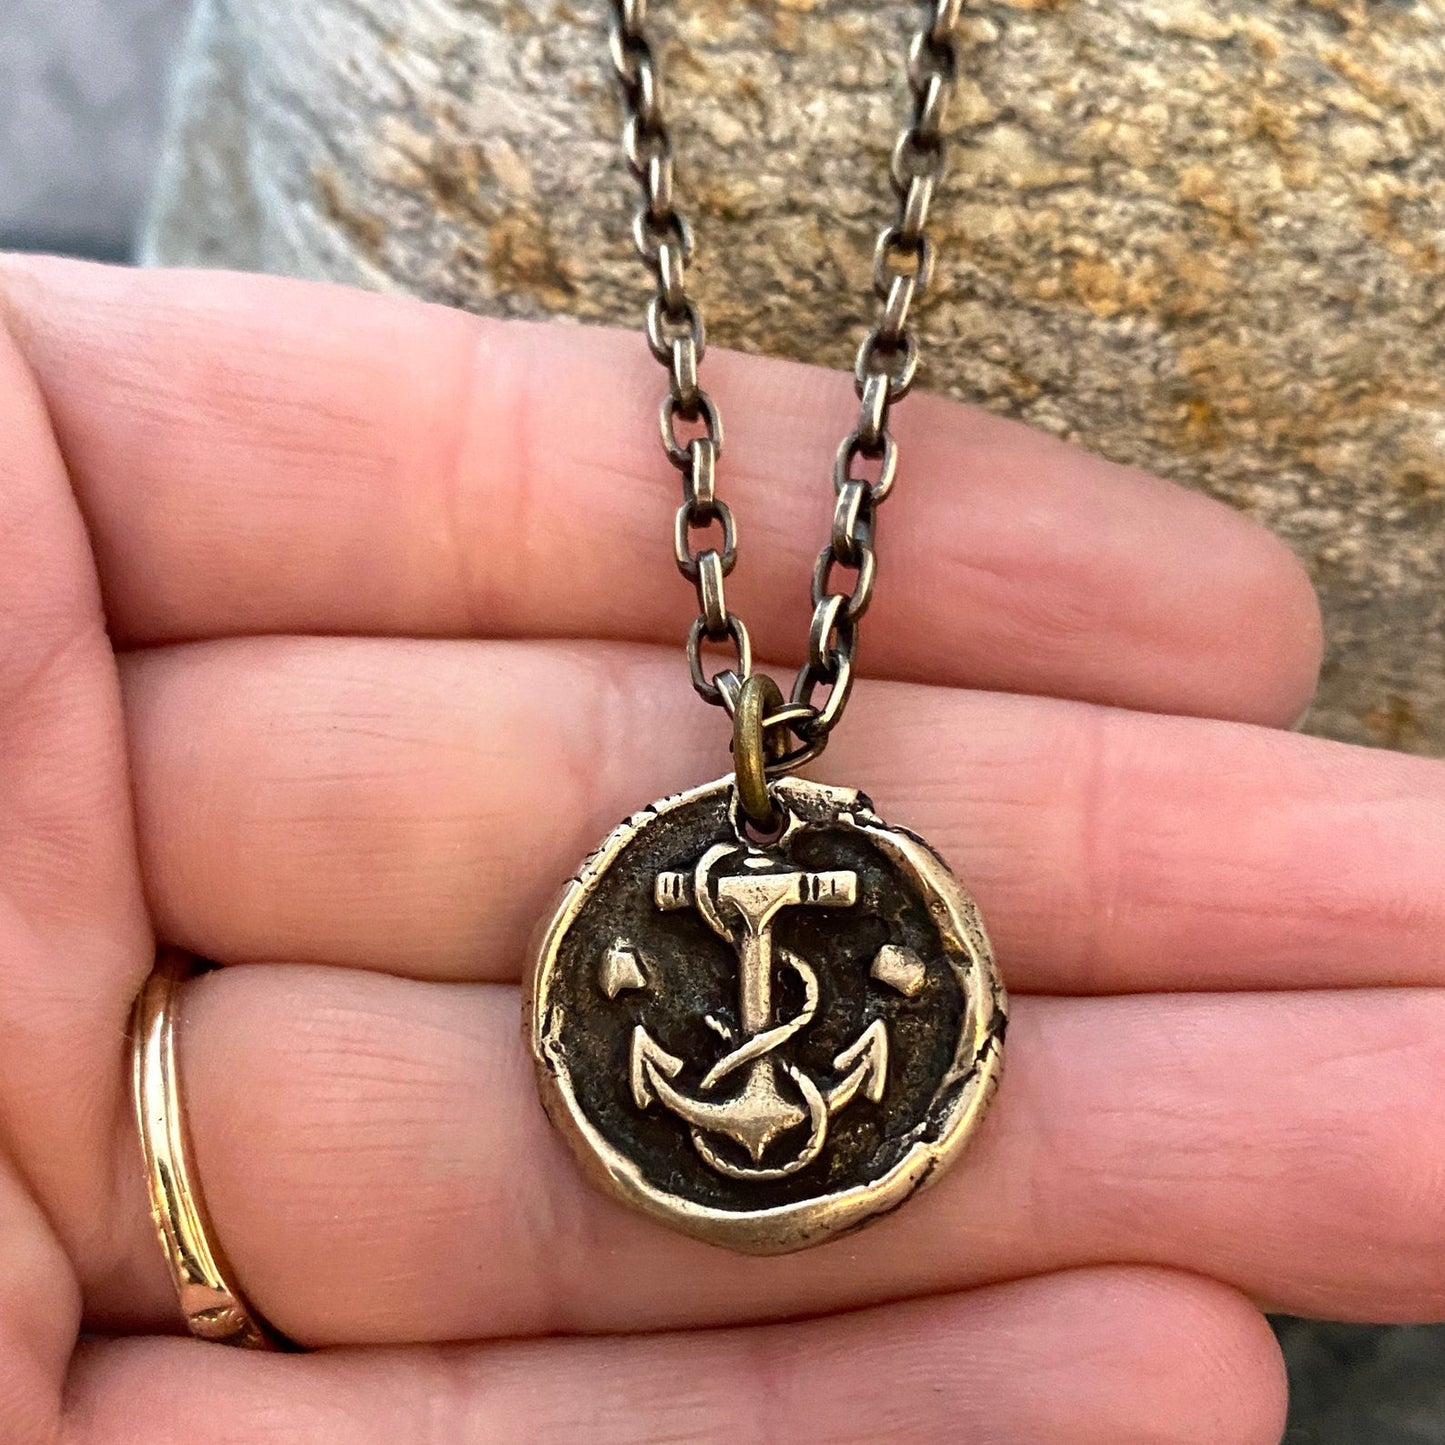 Wax Seal Nautical Anchor Necklace, Brass and Bronze Men's Unisex Ship Sea Jewelry, 20 or 24 Inch Rolo Chain, BR-048